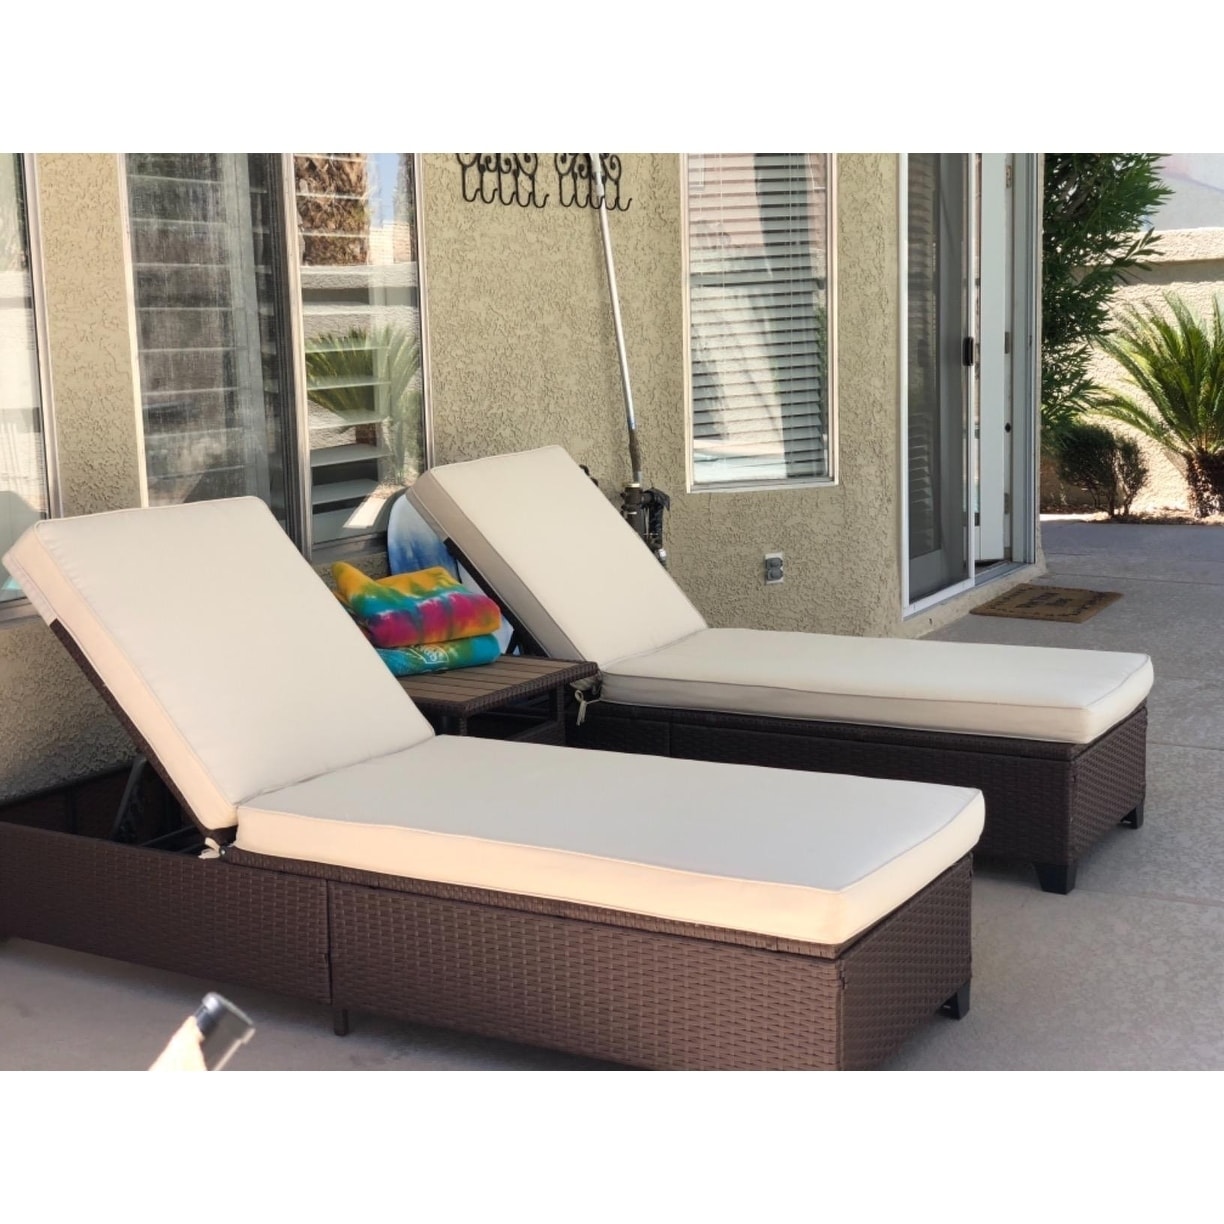 Shop 3 Pc Outdoor Rattan Chaise Lounge Chair Patio Pe Wicker Rattan Furniture Adjustable Garden Pool Lounge Chairs And Table Overstock 20755200